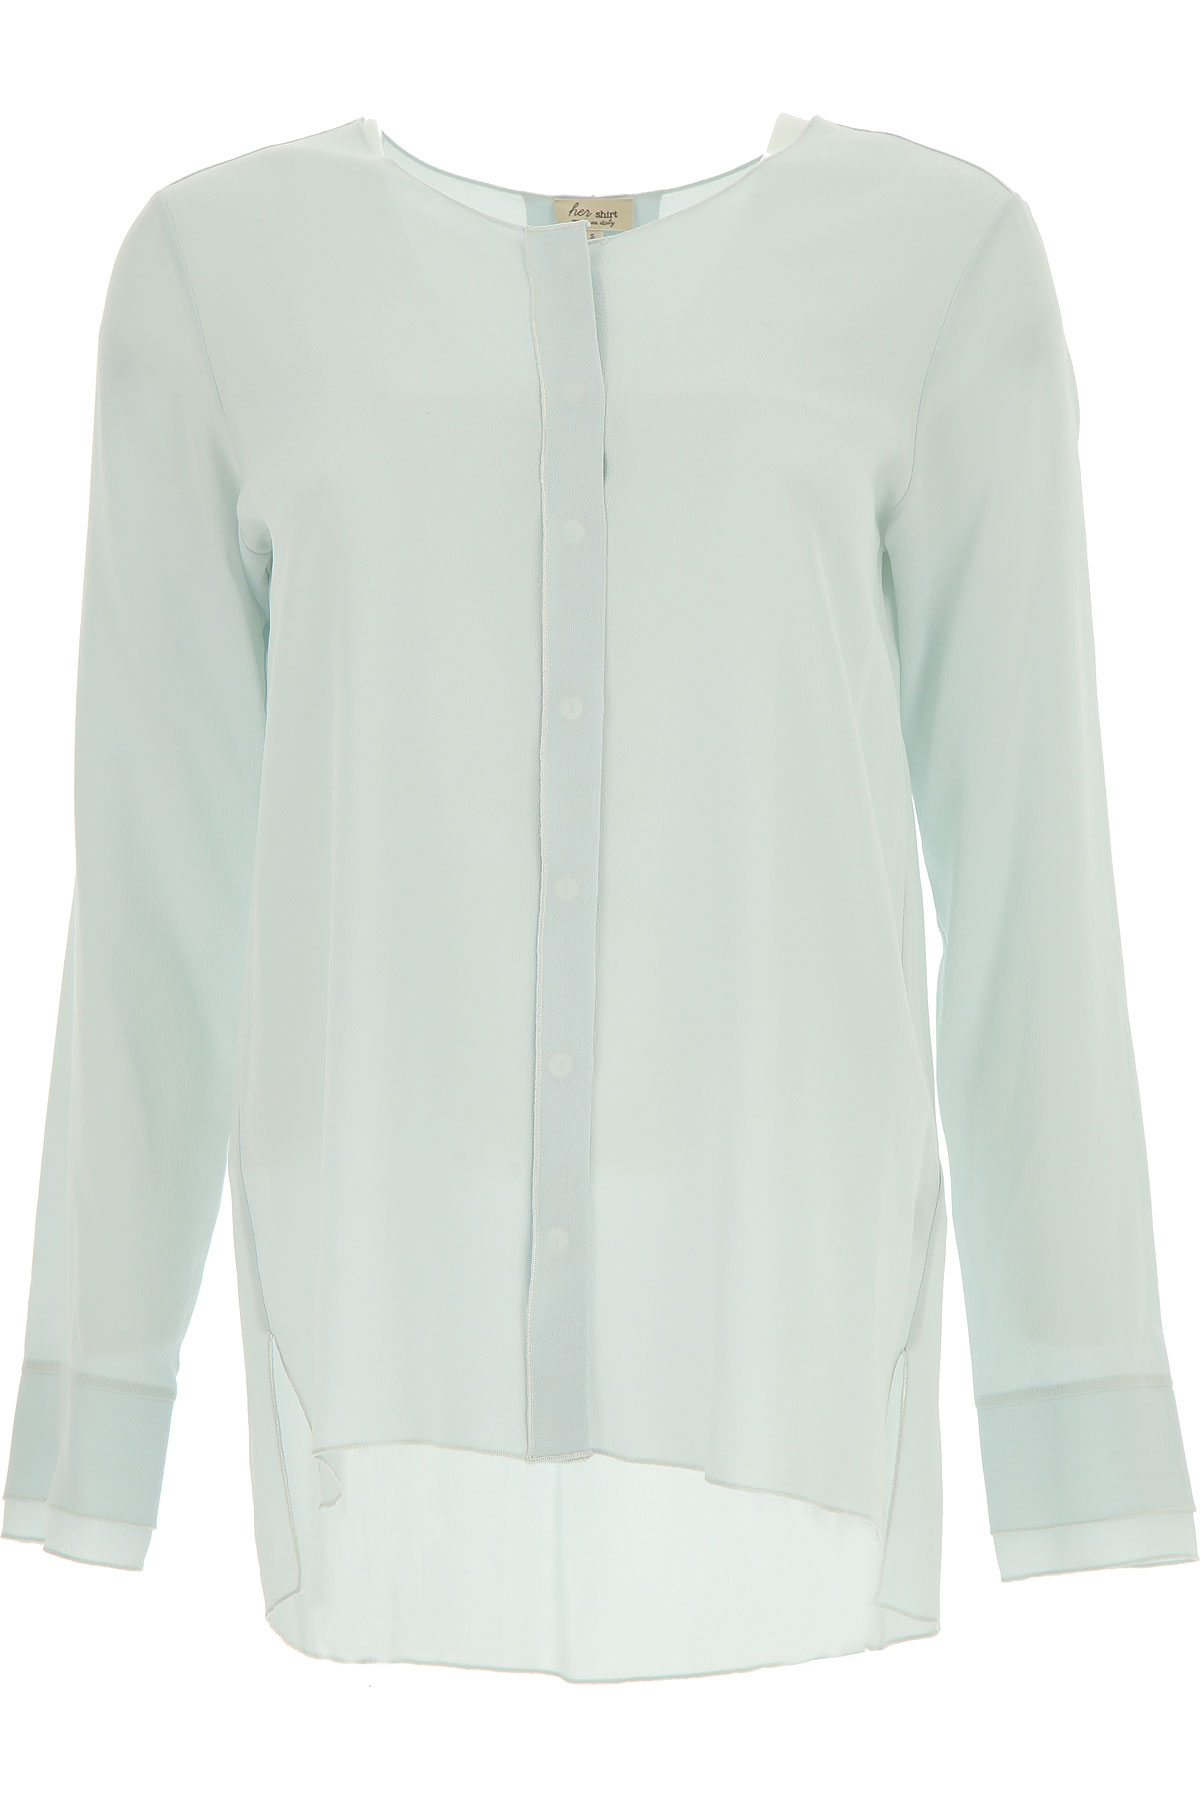 Her Shirt Chemise Femme, Glace, Soie, 2017, 38 40 42 44